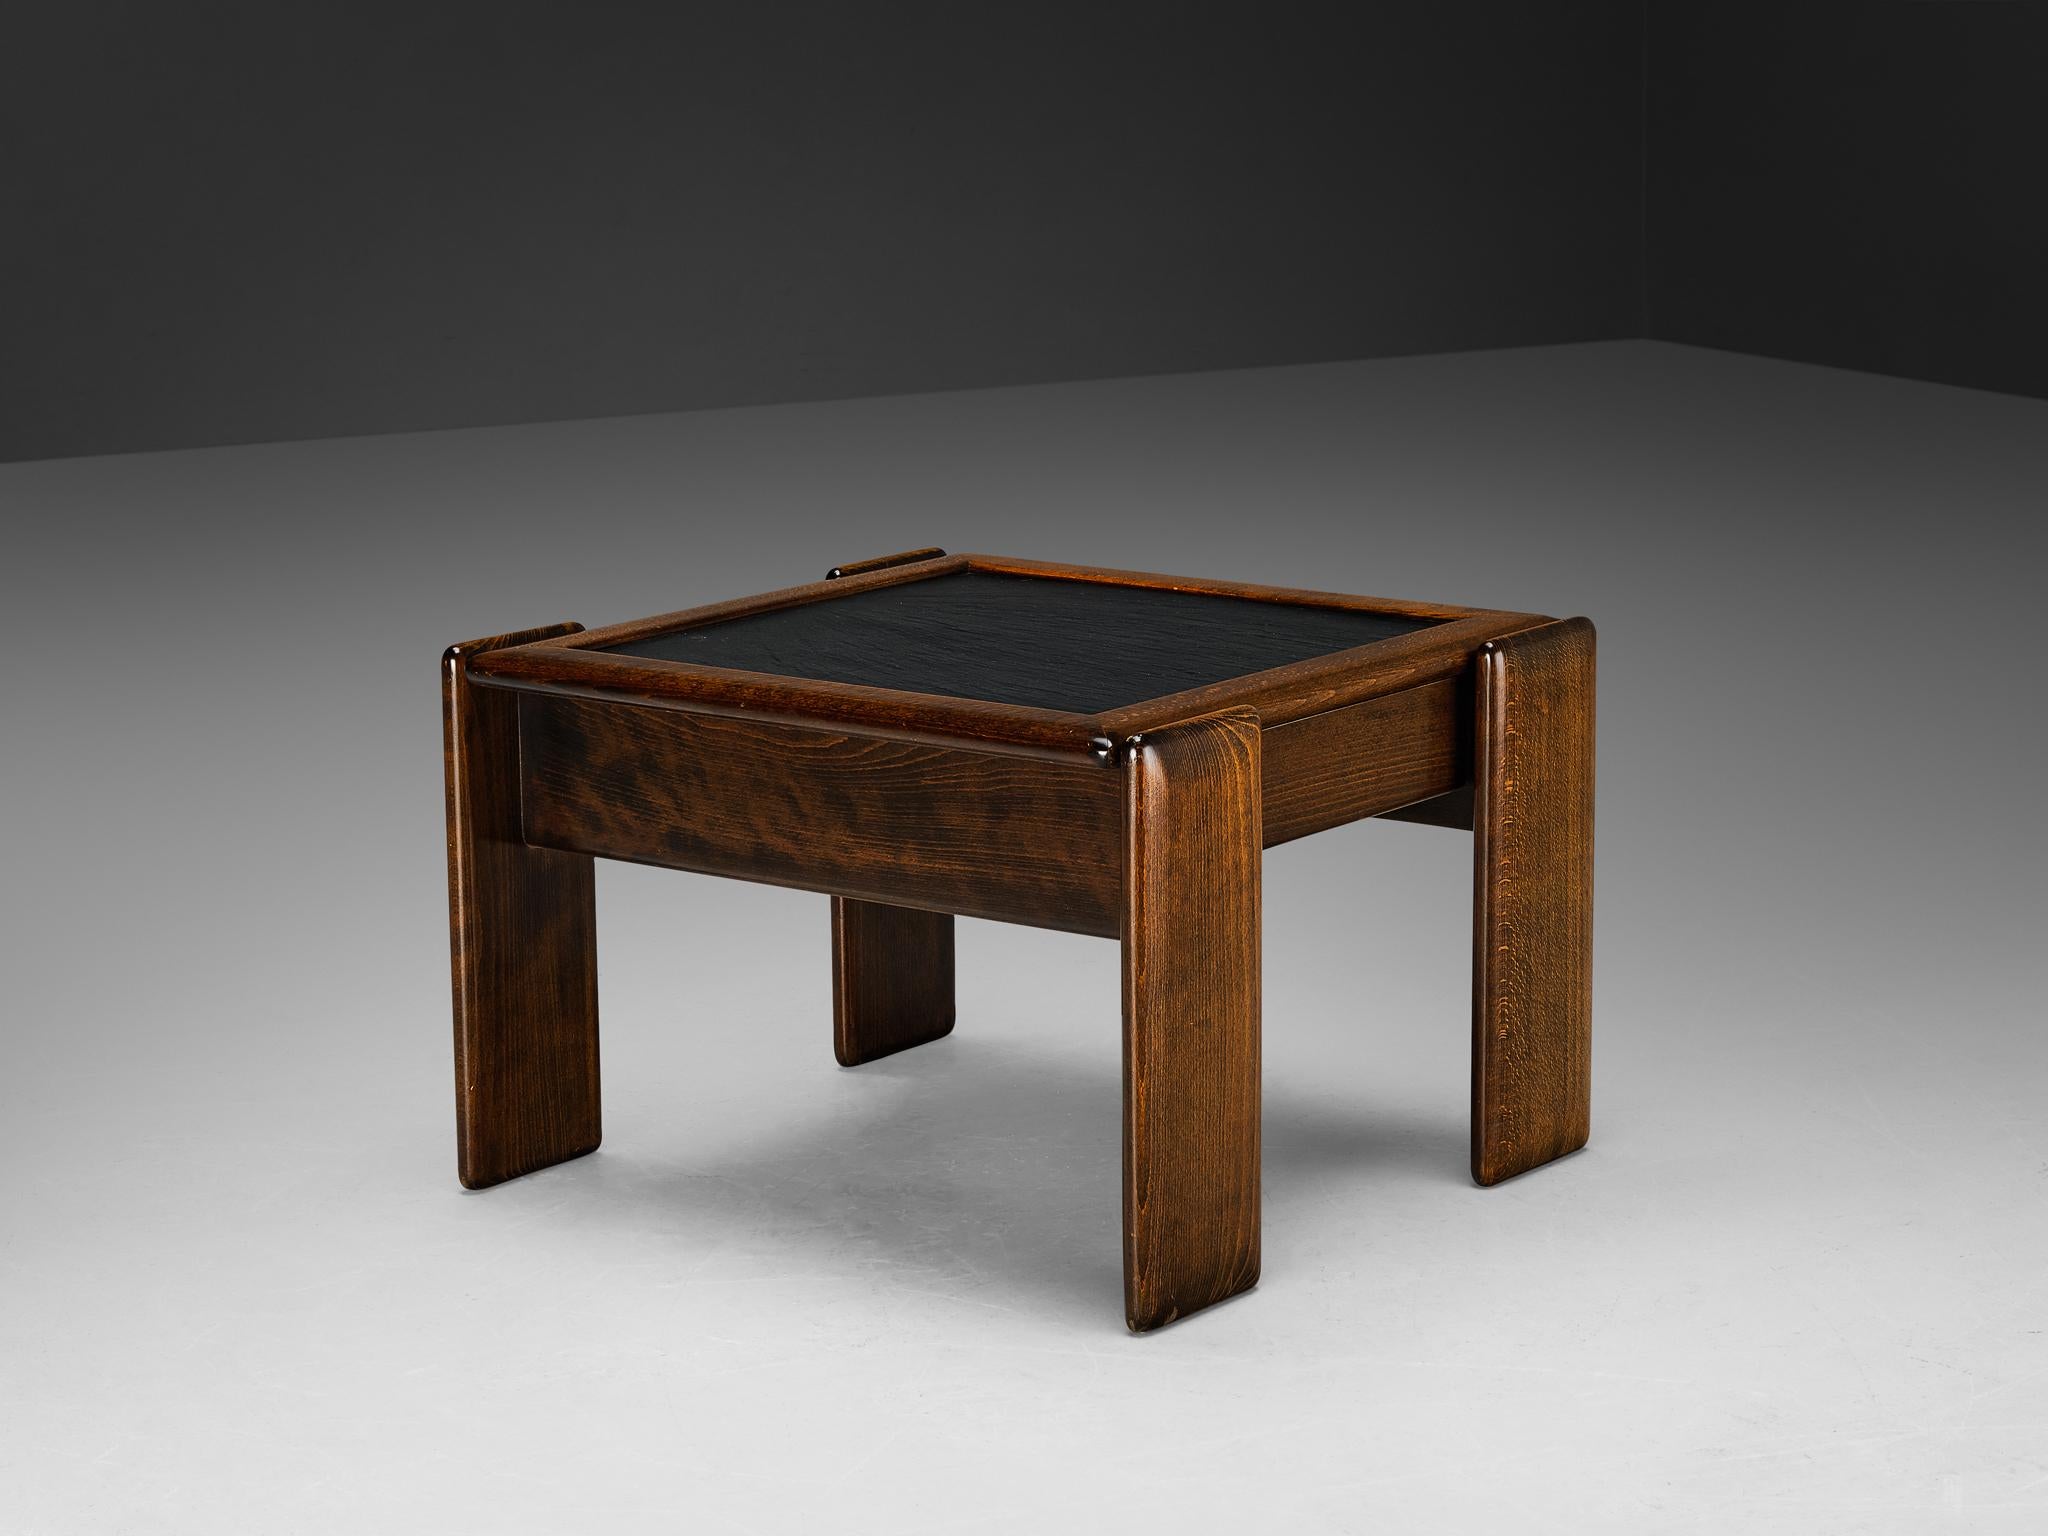 Coffee table, oak, cleft slate, The Netherlands, 1970s

A sleek coffee table with a well-designed frame featuring clear lines and concise geometric shapes. The style reminds of the 'Bastiano' series by Afra & Tobia Scarpa designed in 1960. The